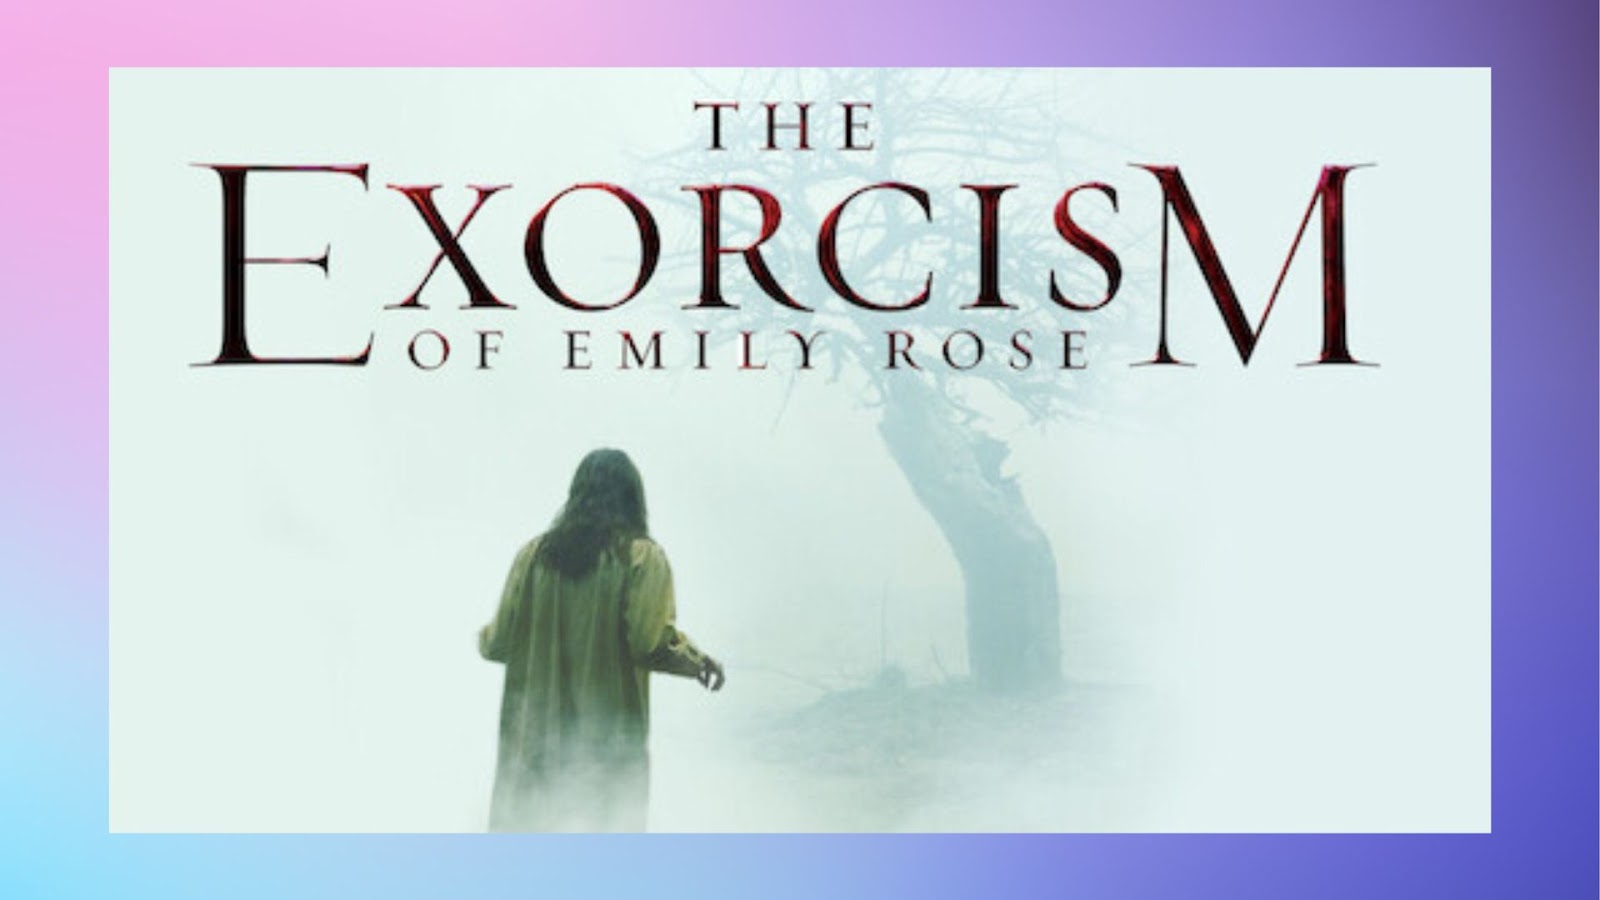 Christian Movies on Hulu - The Exorcism of Emily Rose